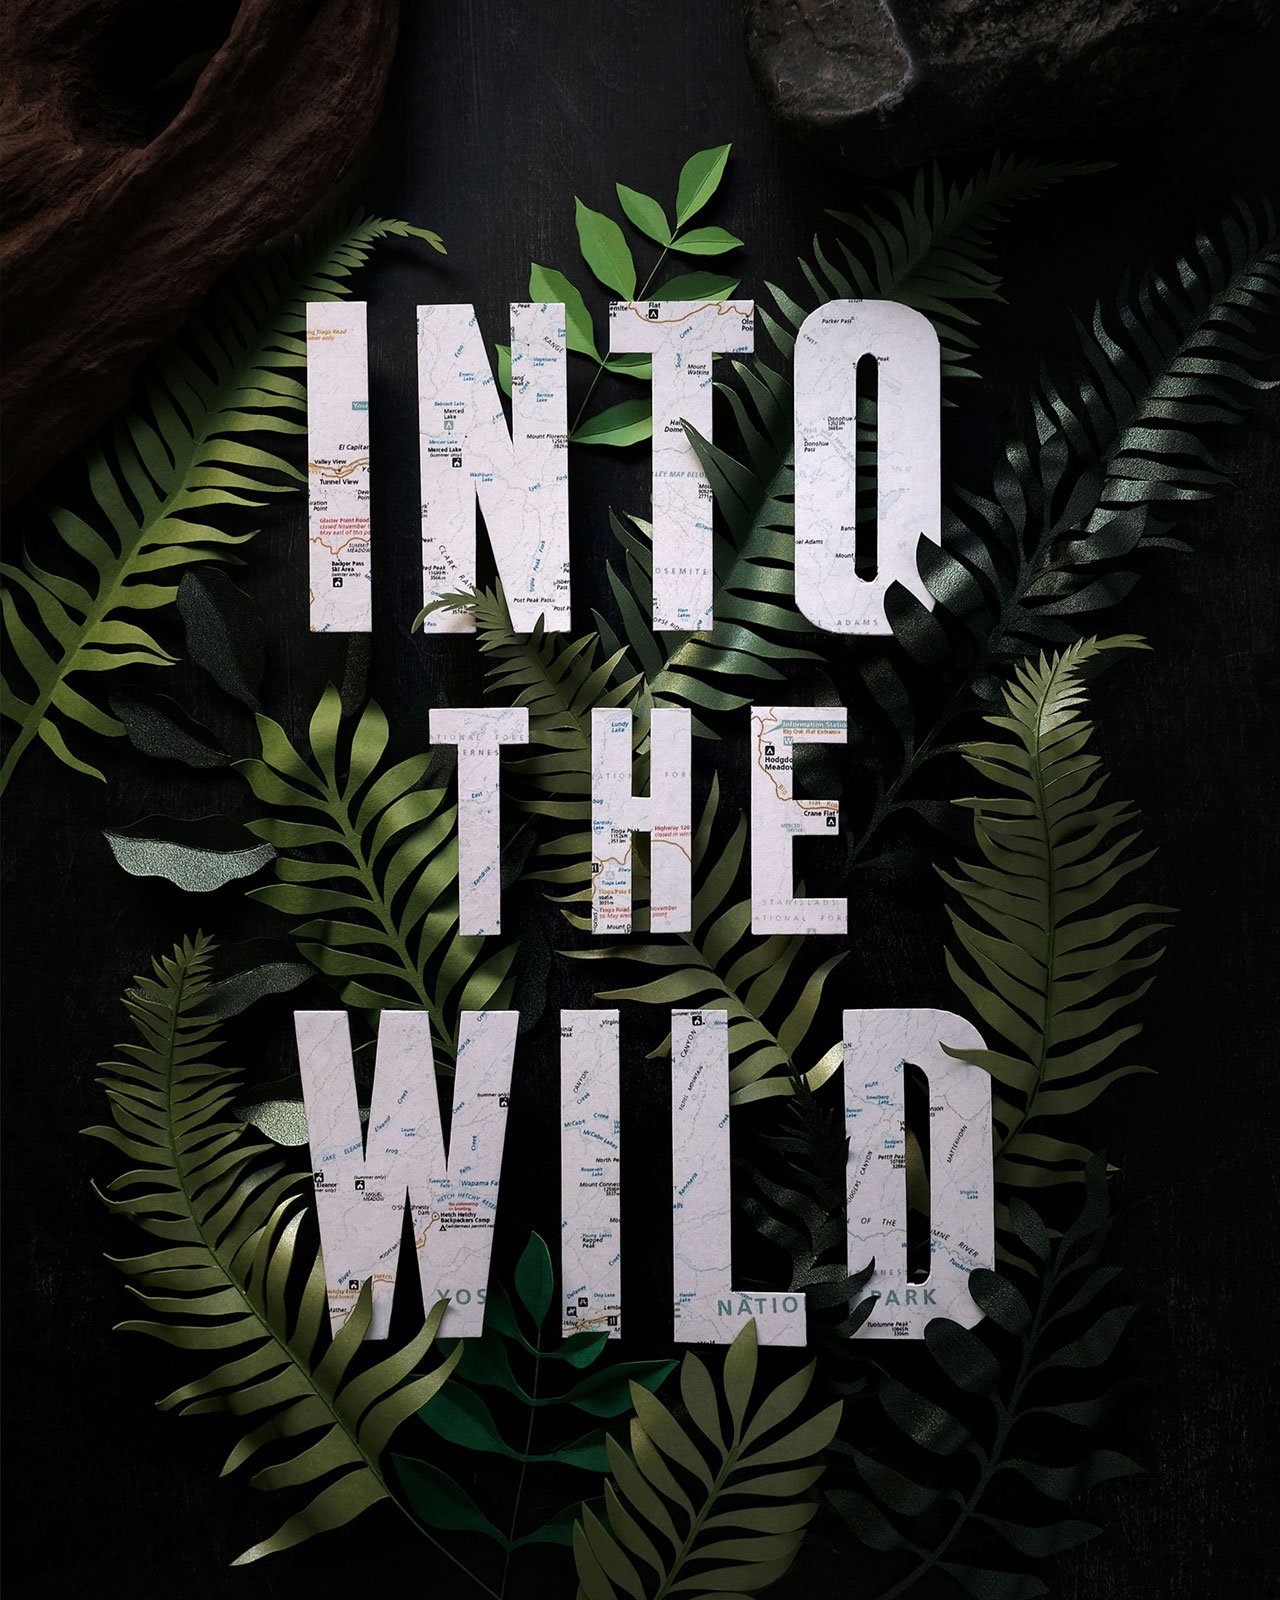 John Ed De Vera, "Into the Wild". Map decoupage on paper cut letters and foliage. Page 64 on Delta Sky Magazine’s Nov 2018 issue.